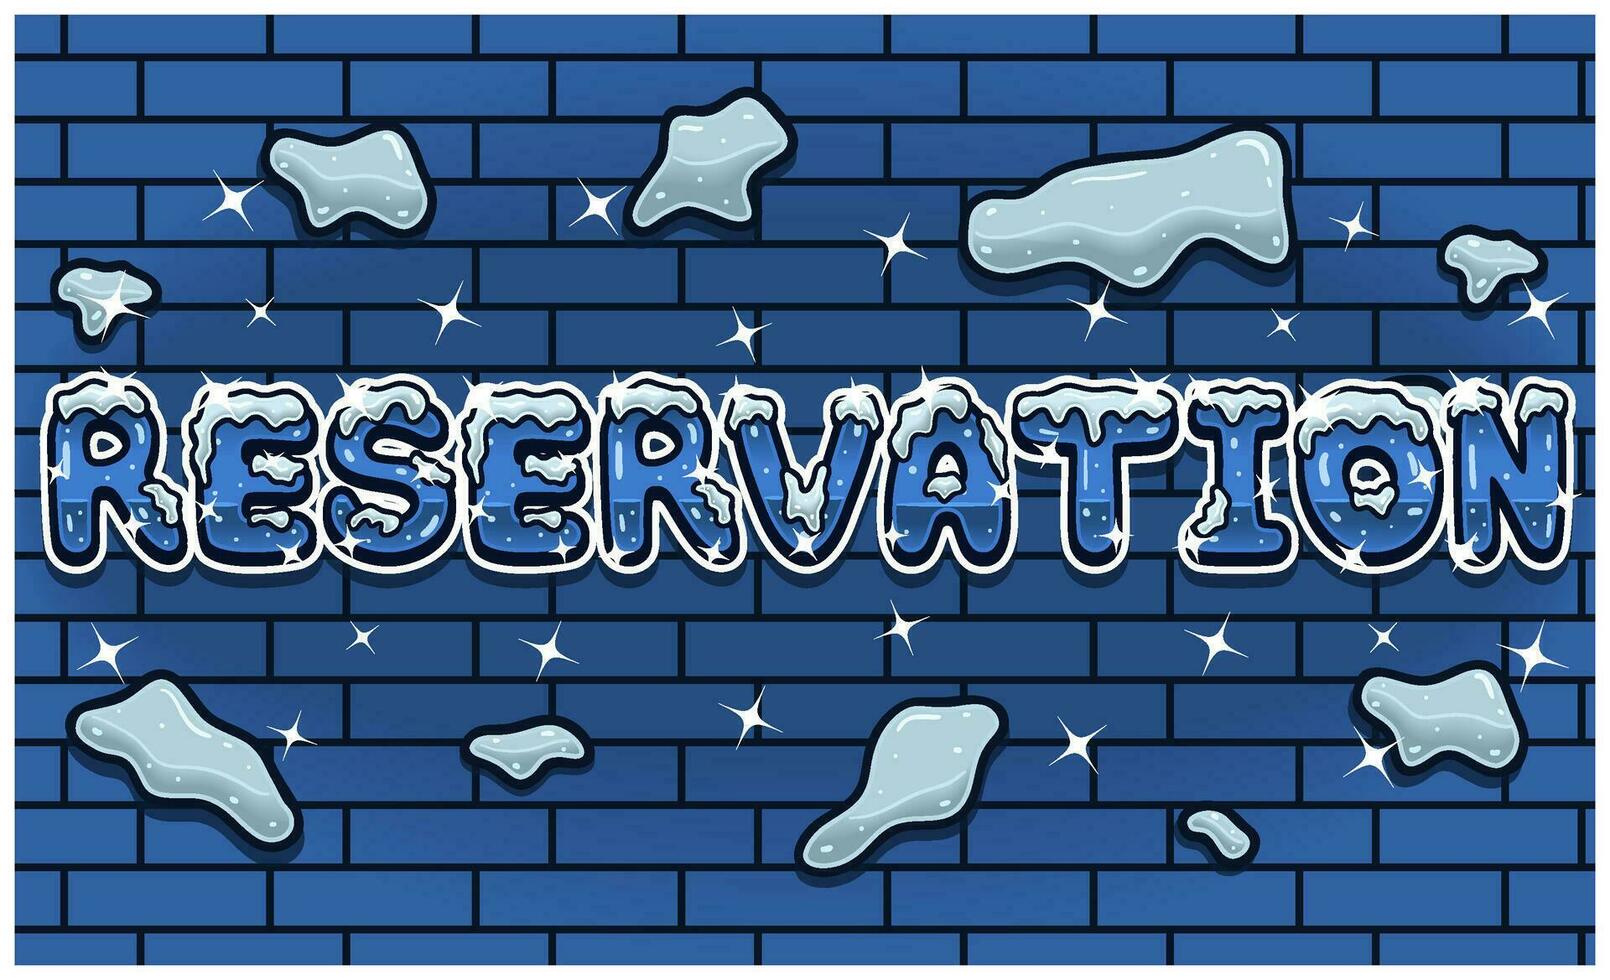 Reservation Lettering With Snow Ice Font In Brick Wall Background For Sign Template. Text Effect and Simple Gradients. vector